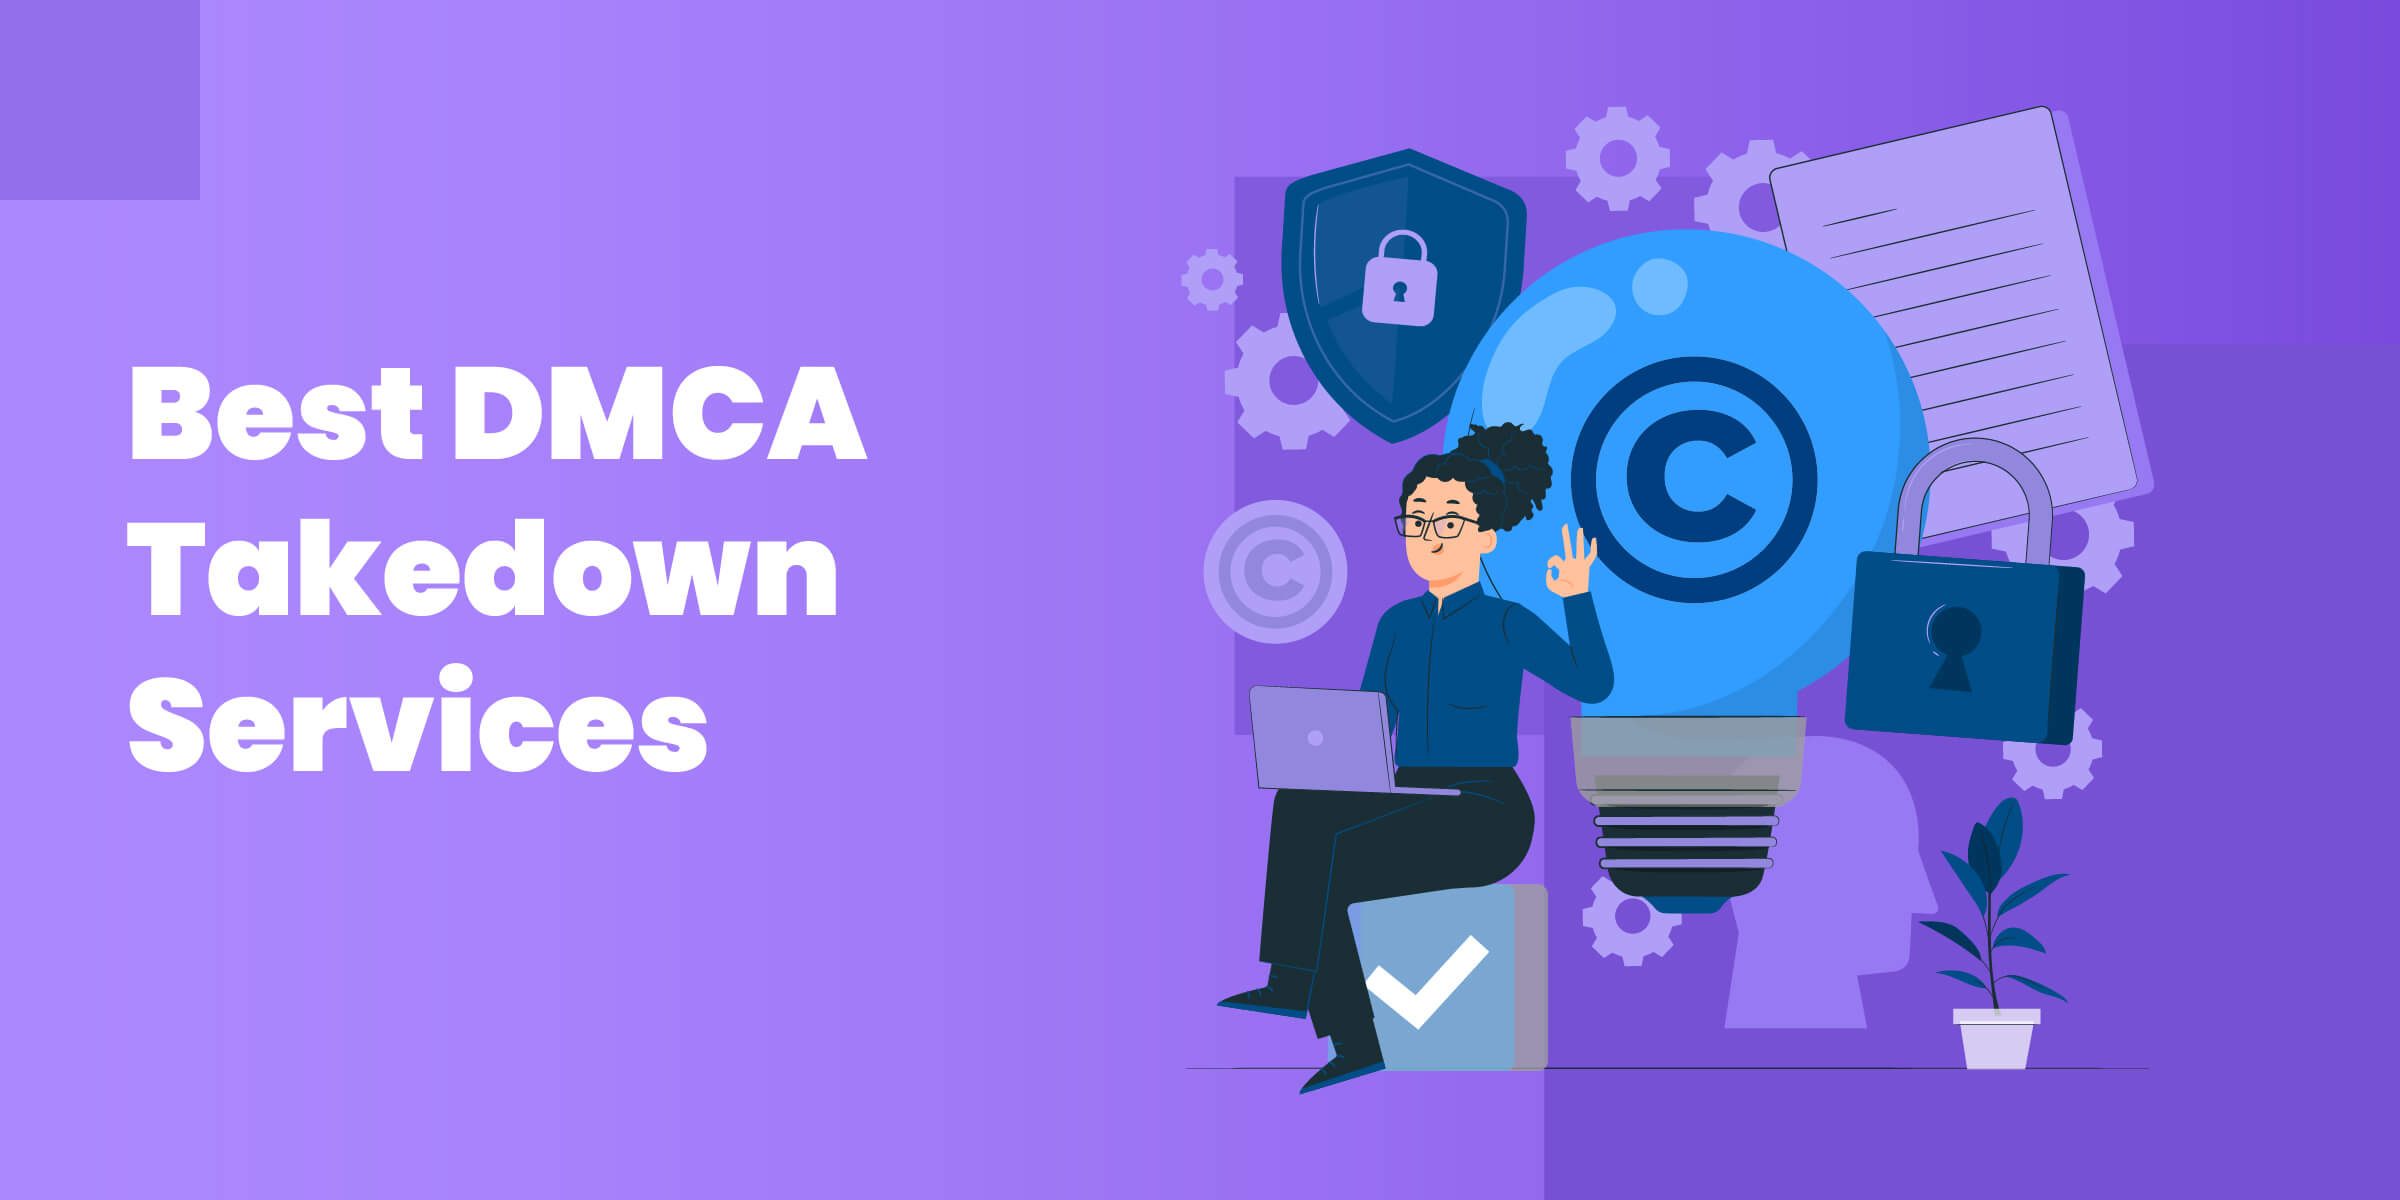 Best DMCA Takedown Services